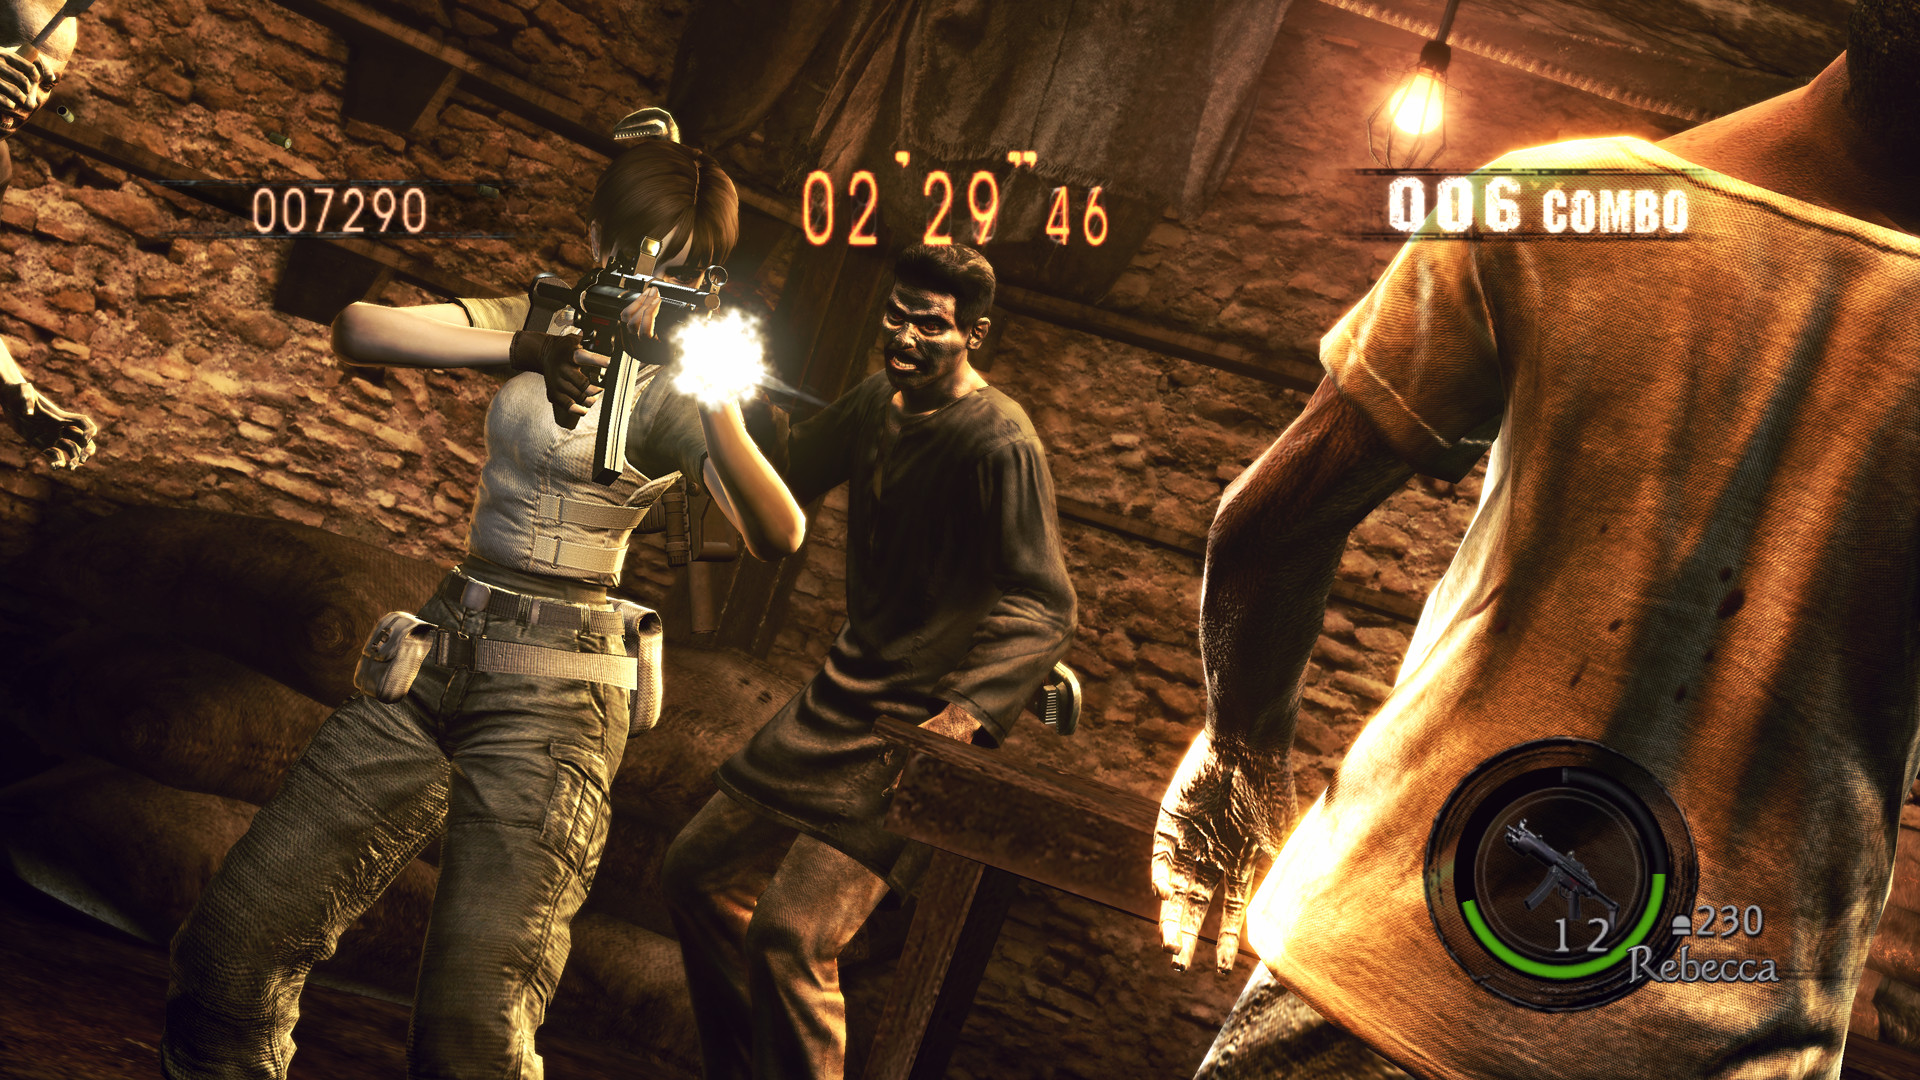 Surprise Resident Evil 5 Steam update adds local co-op after six years